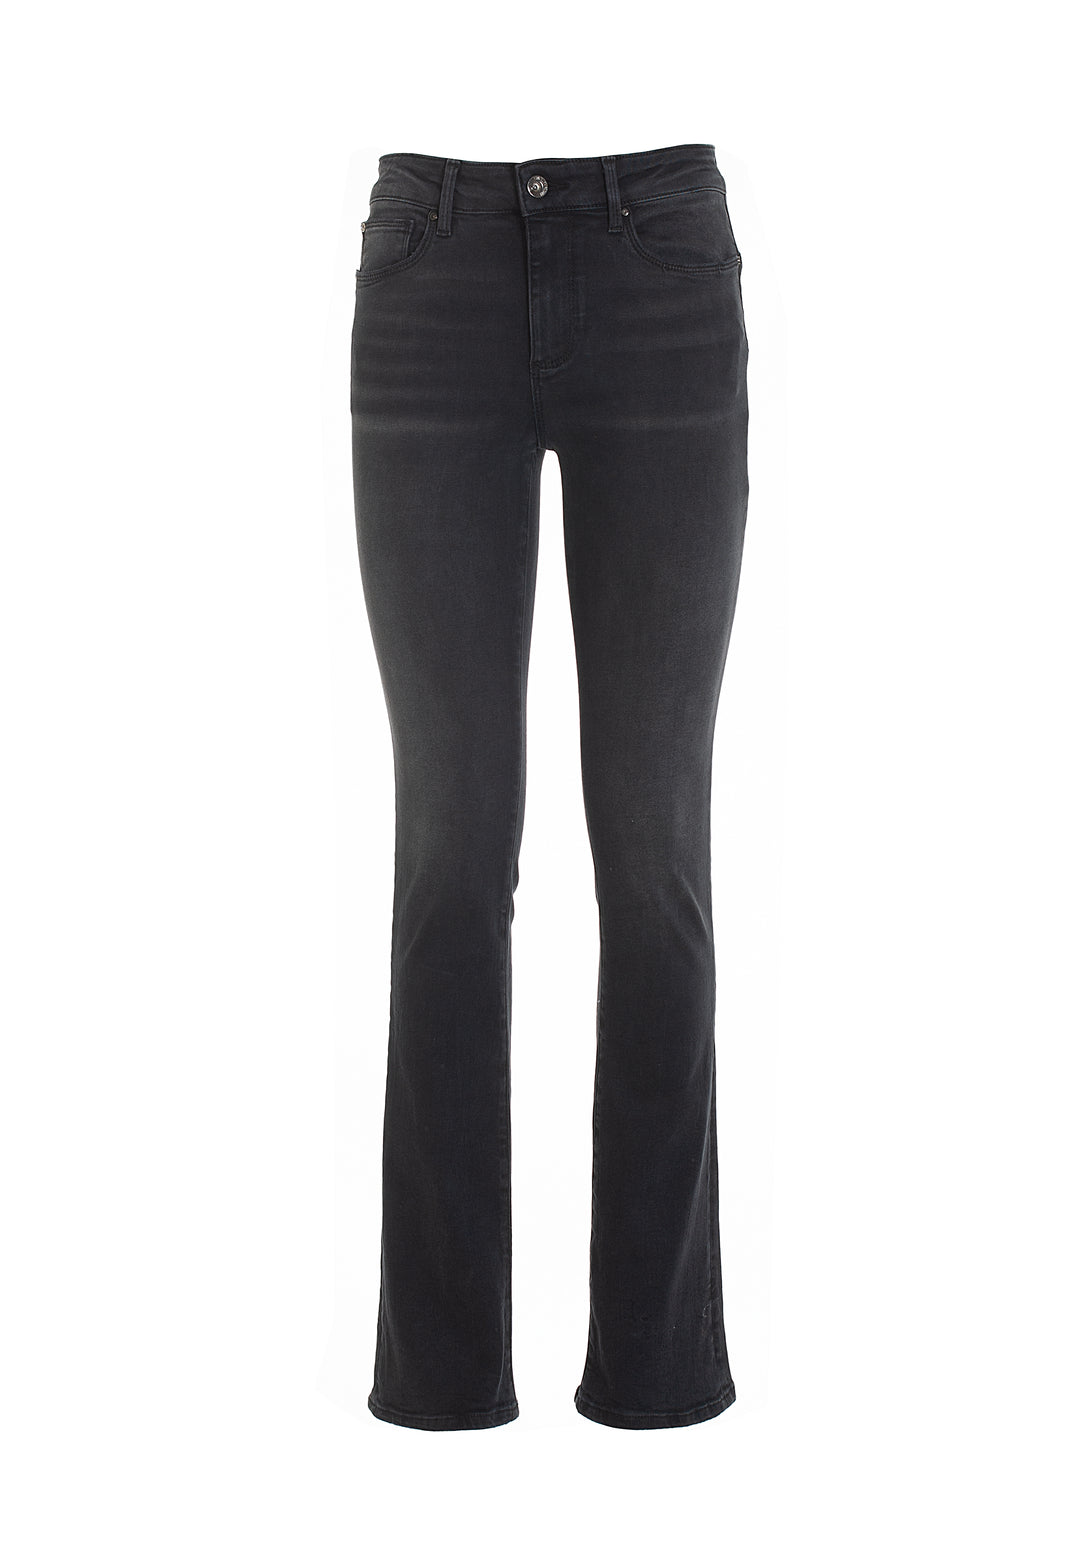 Jeans skinny fit with shape-up effect made in black denim with dark wash